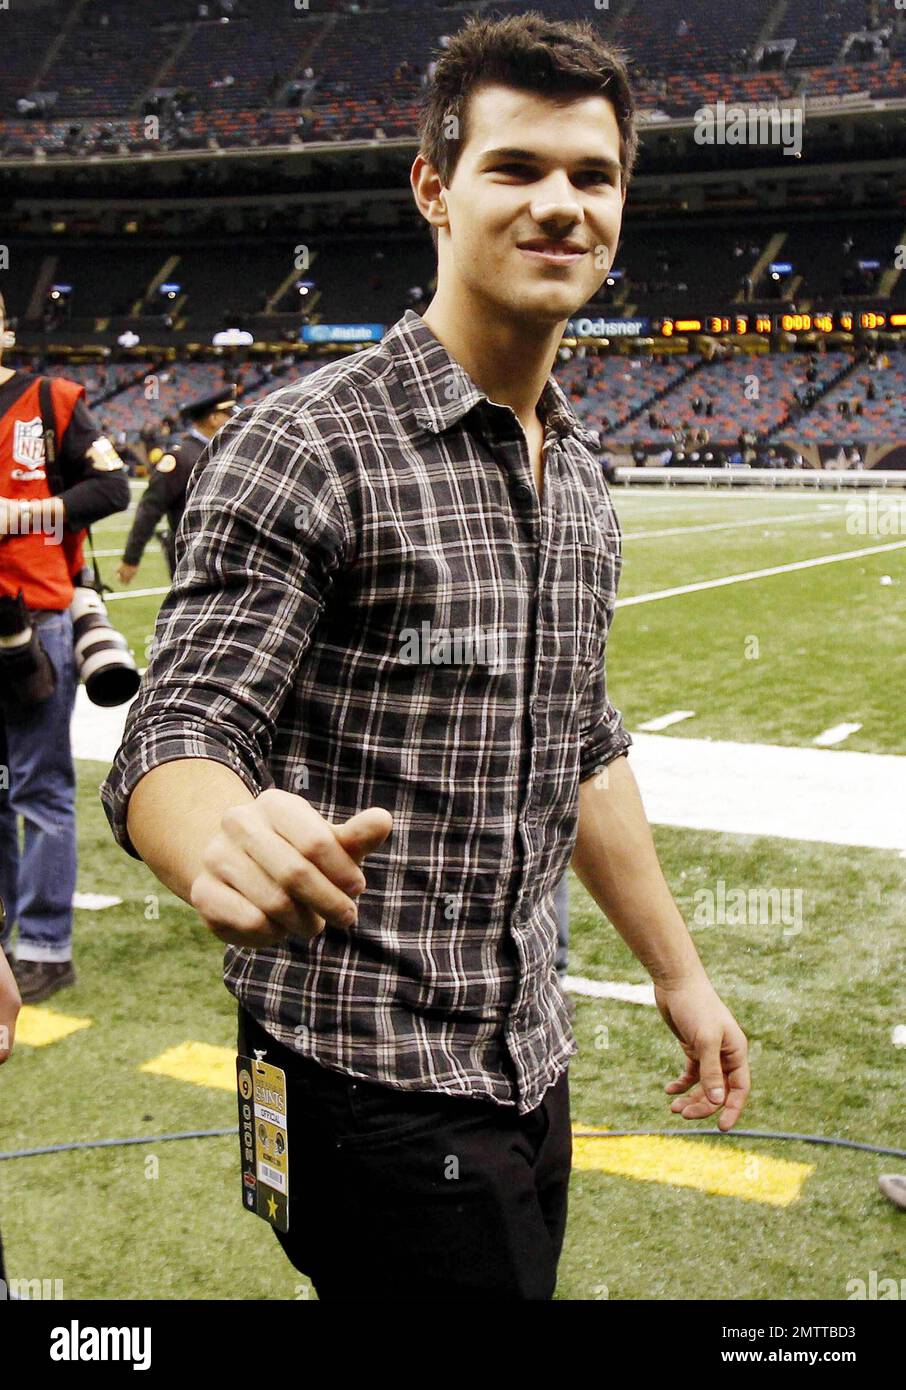 Taylor Lautner signs an autograph while on the ootball ield at Louisiana Superdome ater the St. Louis Rams versus New Orleans Saints game.  The 'Twilight' star walked with a security entourage and met with some people on the ield.  Also at the game was actress Miley Cyrus who is in town to shoot her new movie 'So Undercover'.  A ew months back rumors circulated suggesting the teens might work on a ilm together. New Orleans, LA. 12/12/10. Stock Photo